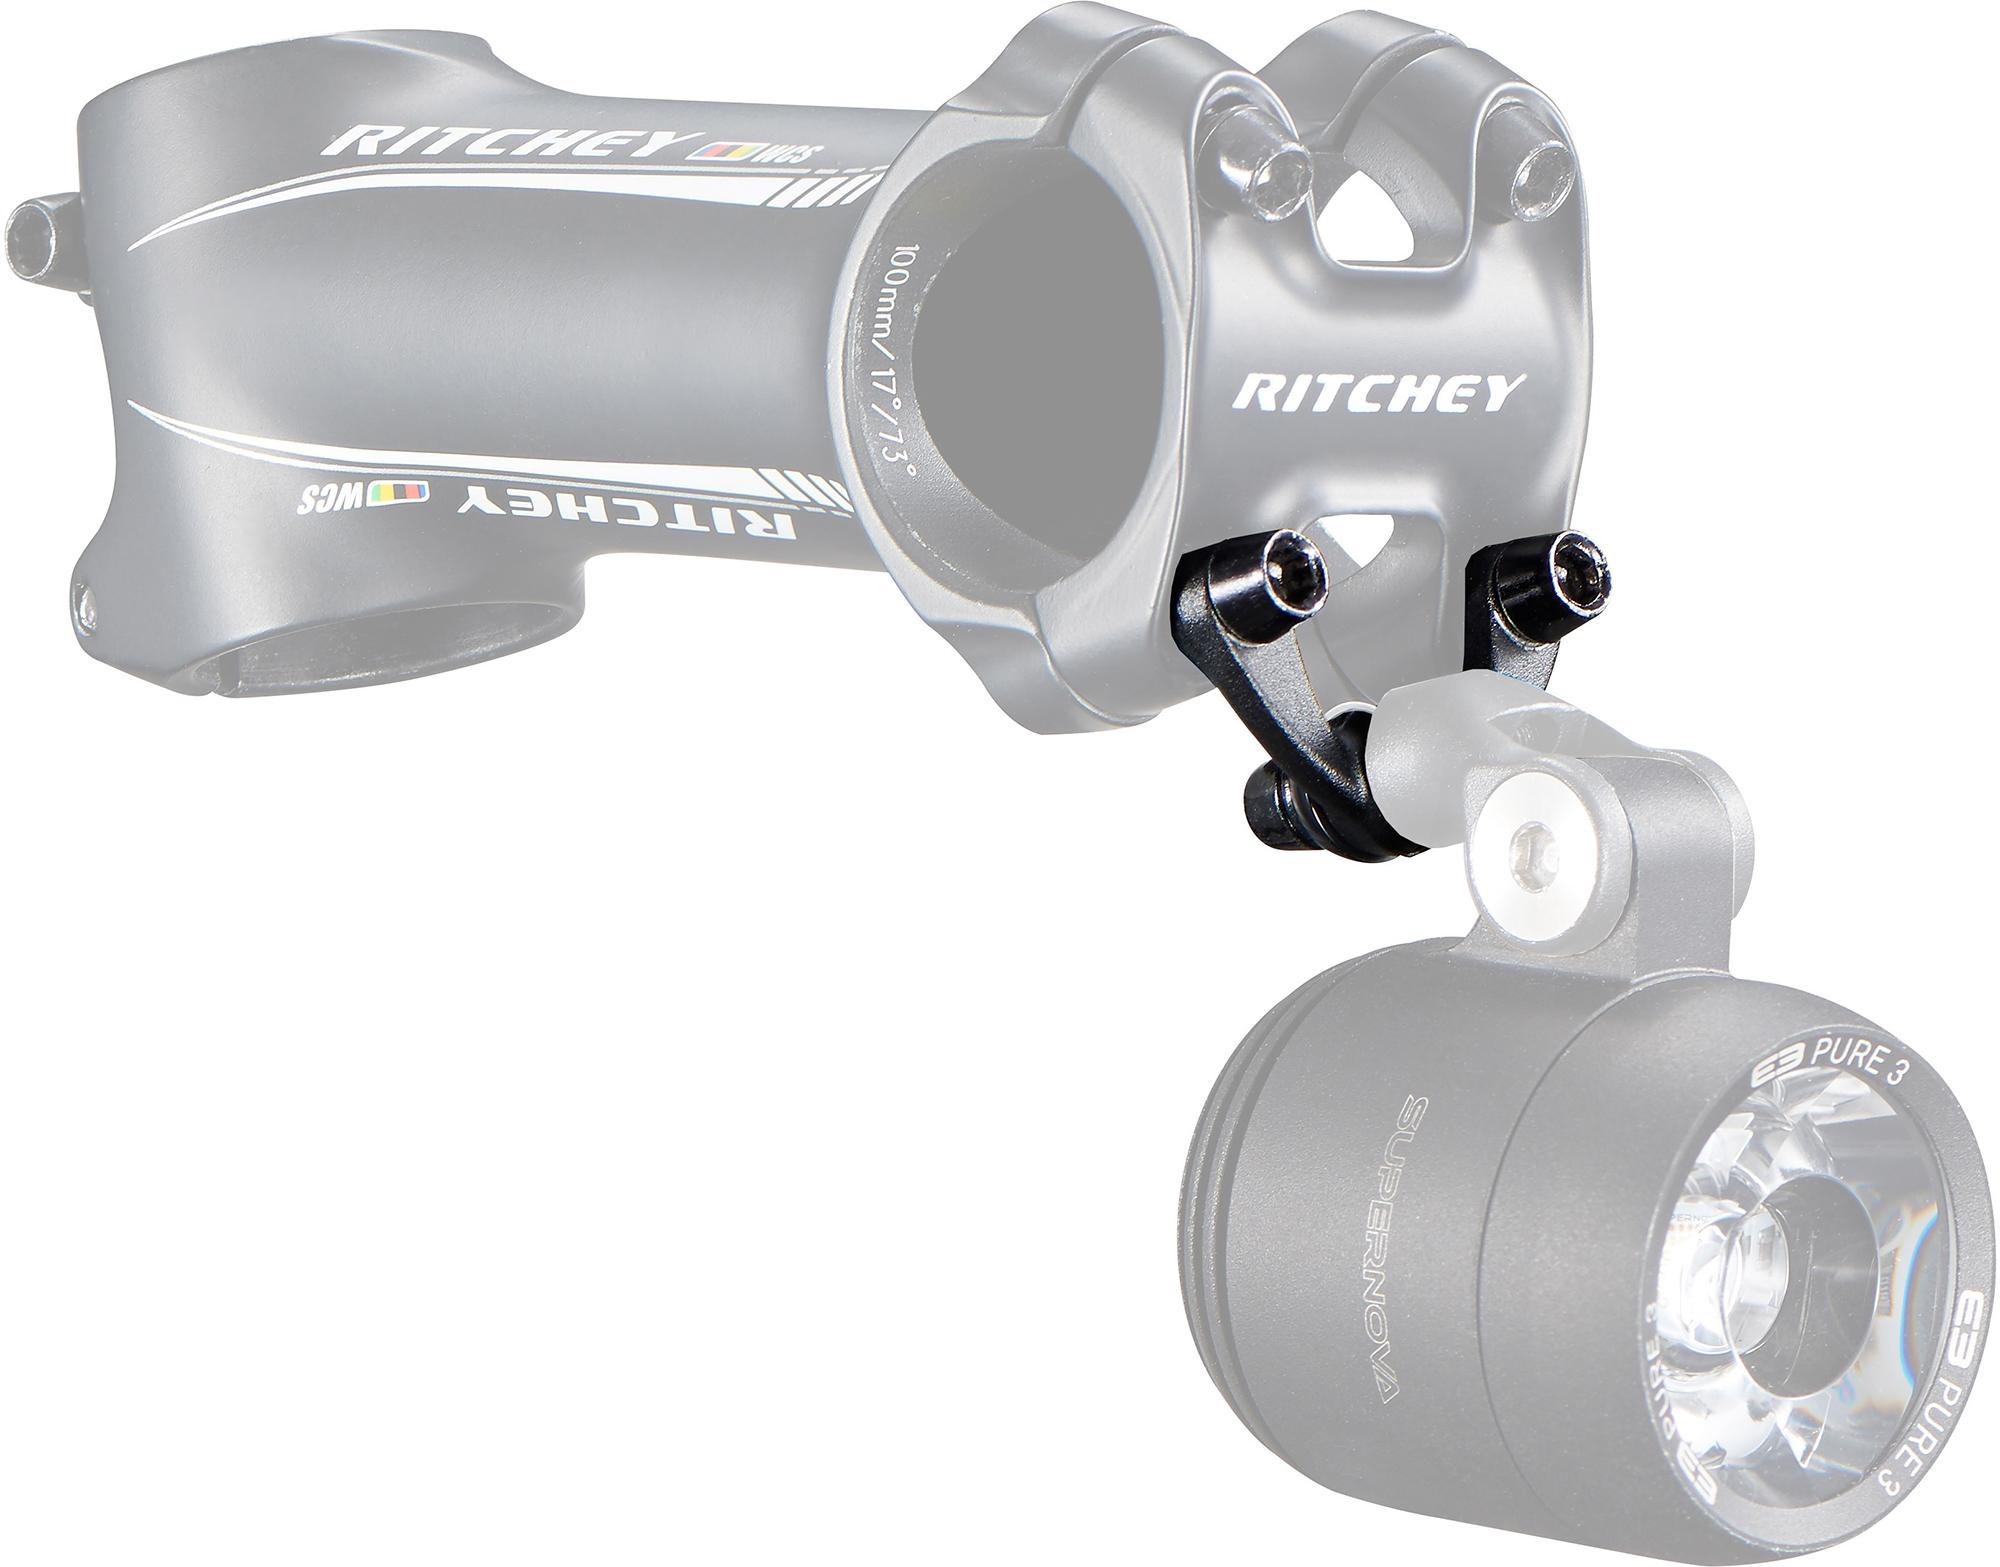 Ritchey Universal Stem Mount C220 And 4-axis 44 - Blatte